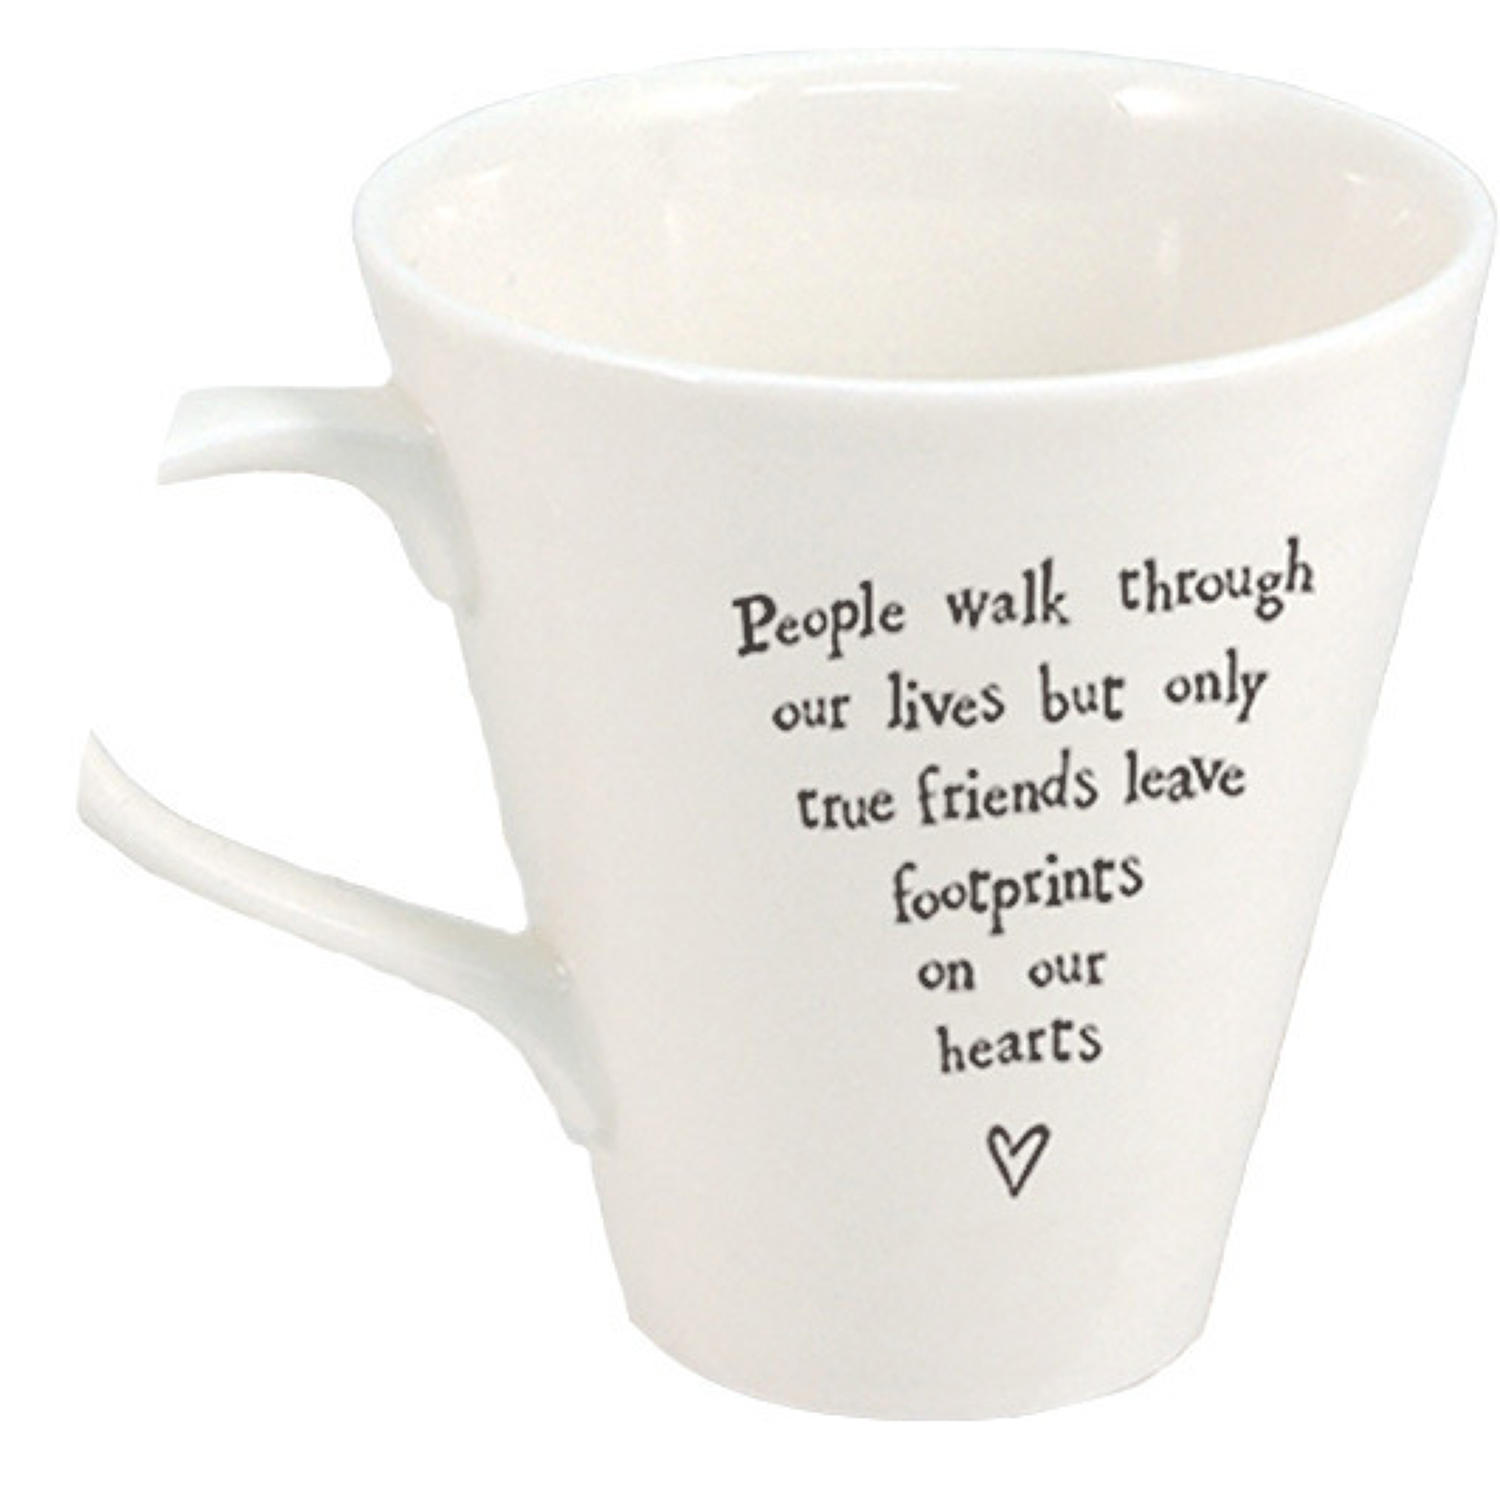 East of India - Boxed porcelain mug - People walk through our lives